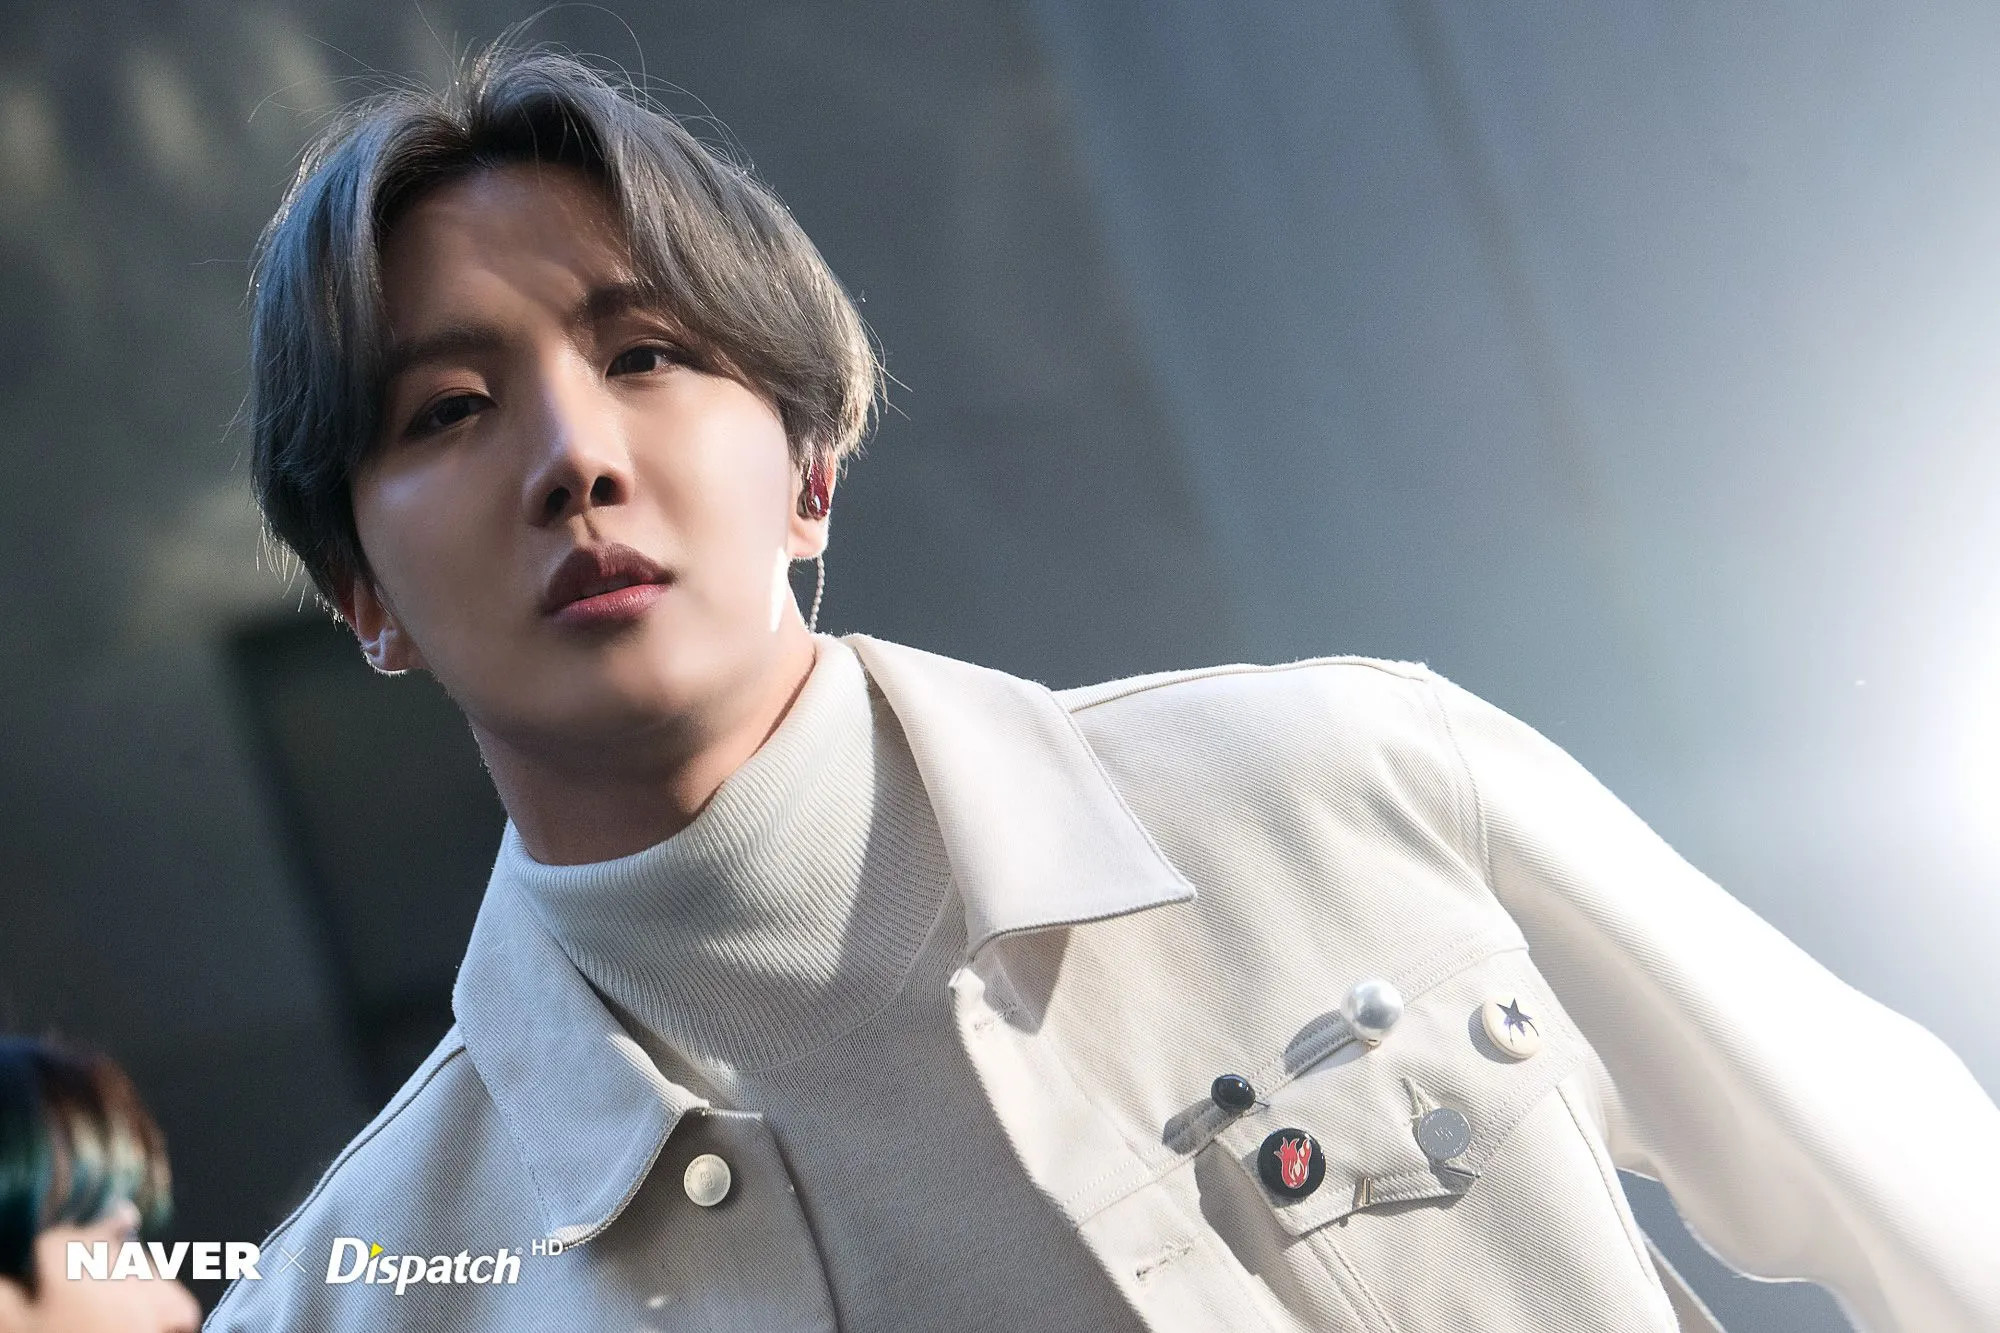 BTS's J-Hope in New York City at the 'Today Show' by Naver x